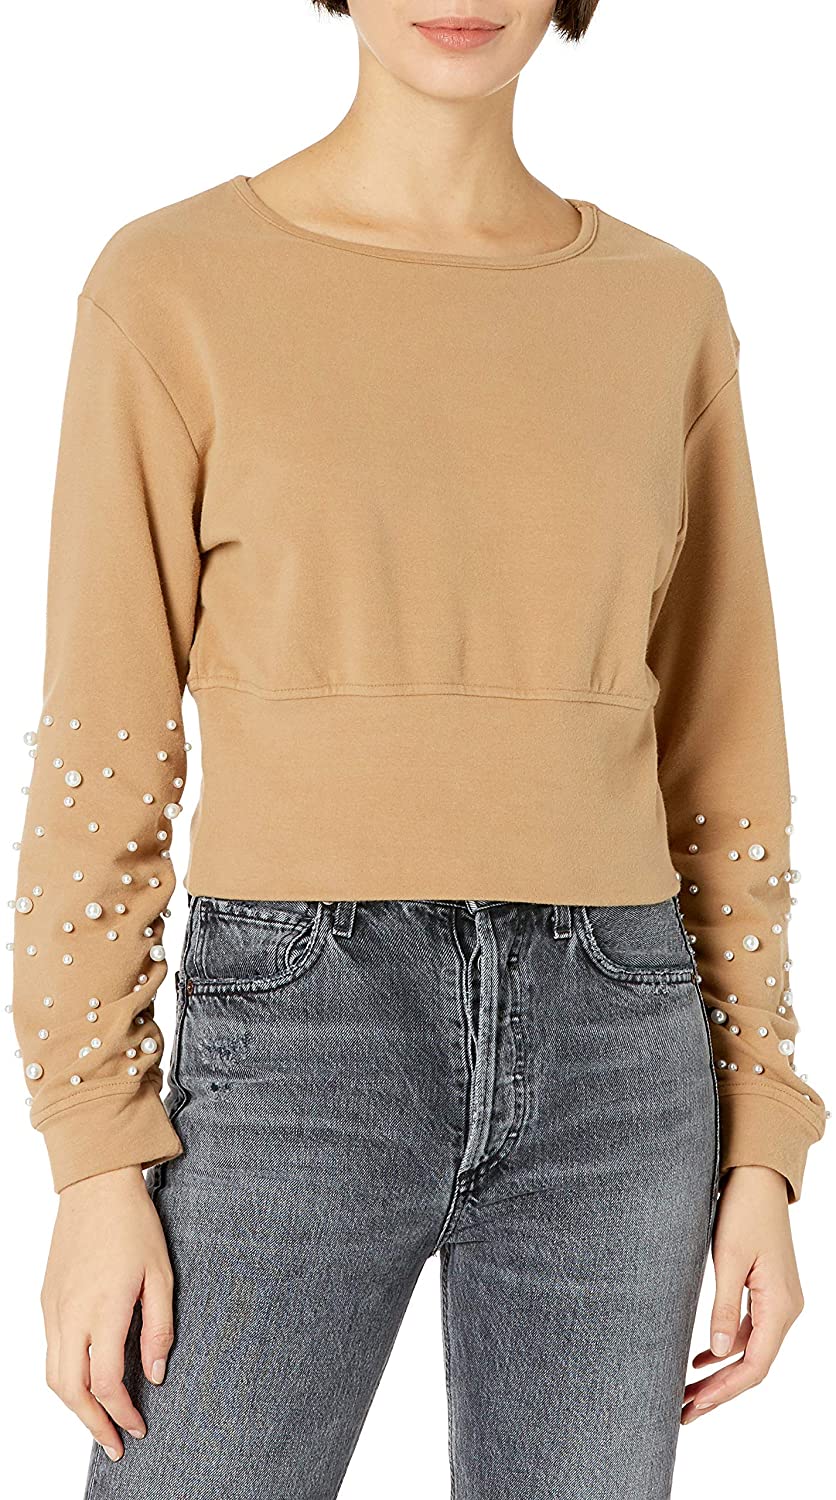 Kendall & Kylie + Pearl Embellished Sweatshirt With Back Cut-out